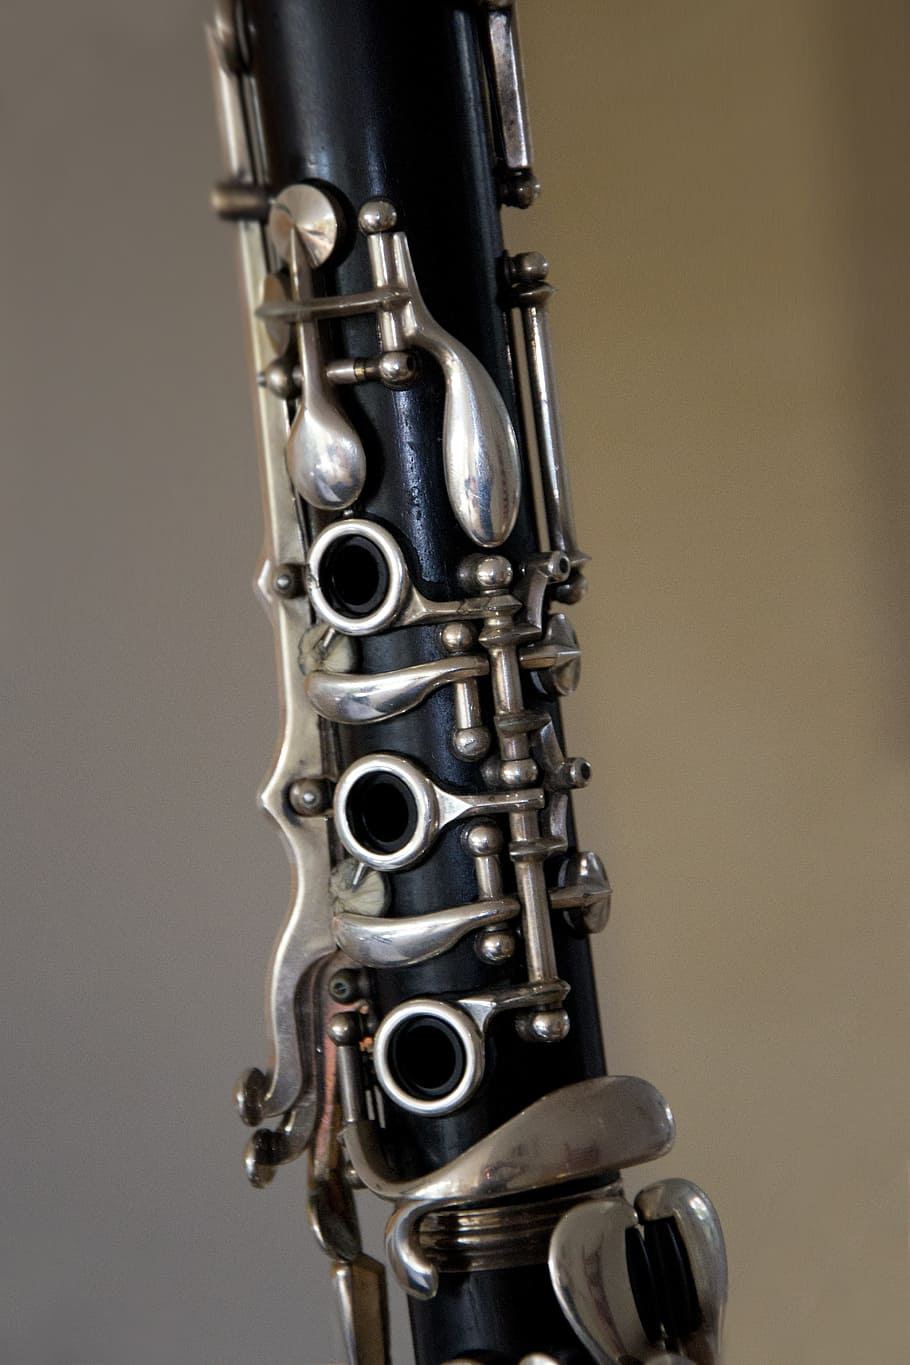 close-up, black, silver clarinet, Clarinet, Musical Instrument, music, woodwind, folding, silver, nickel silver